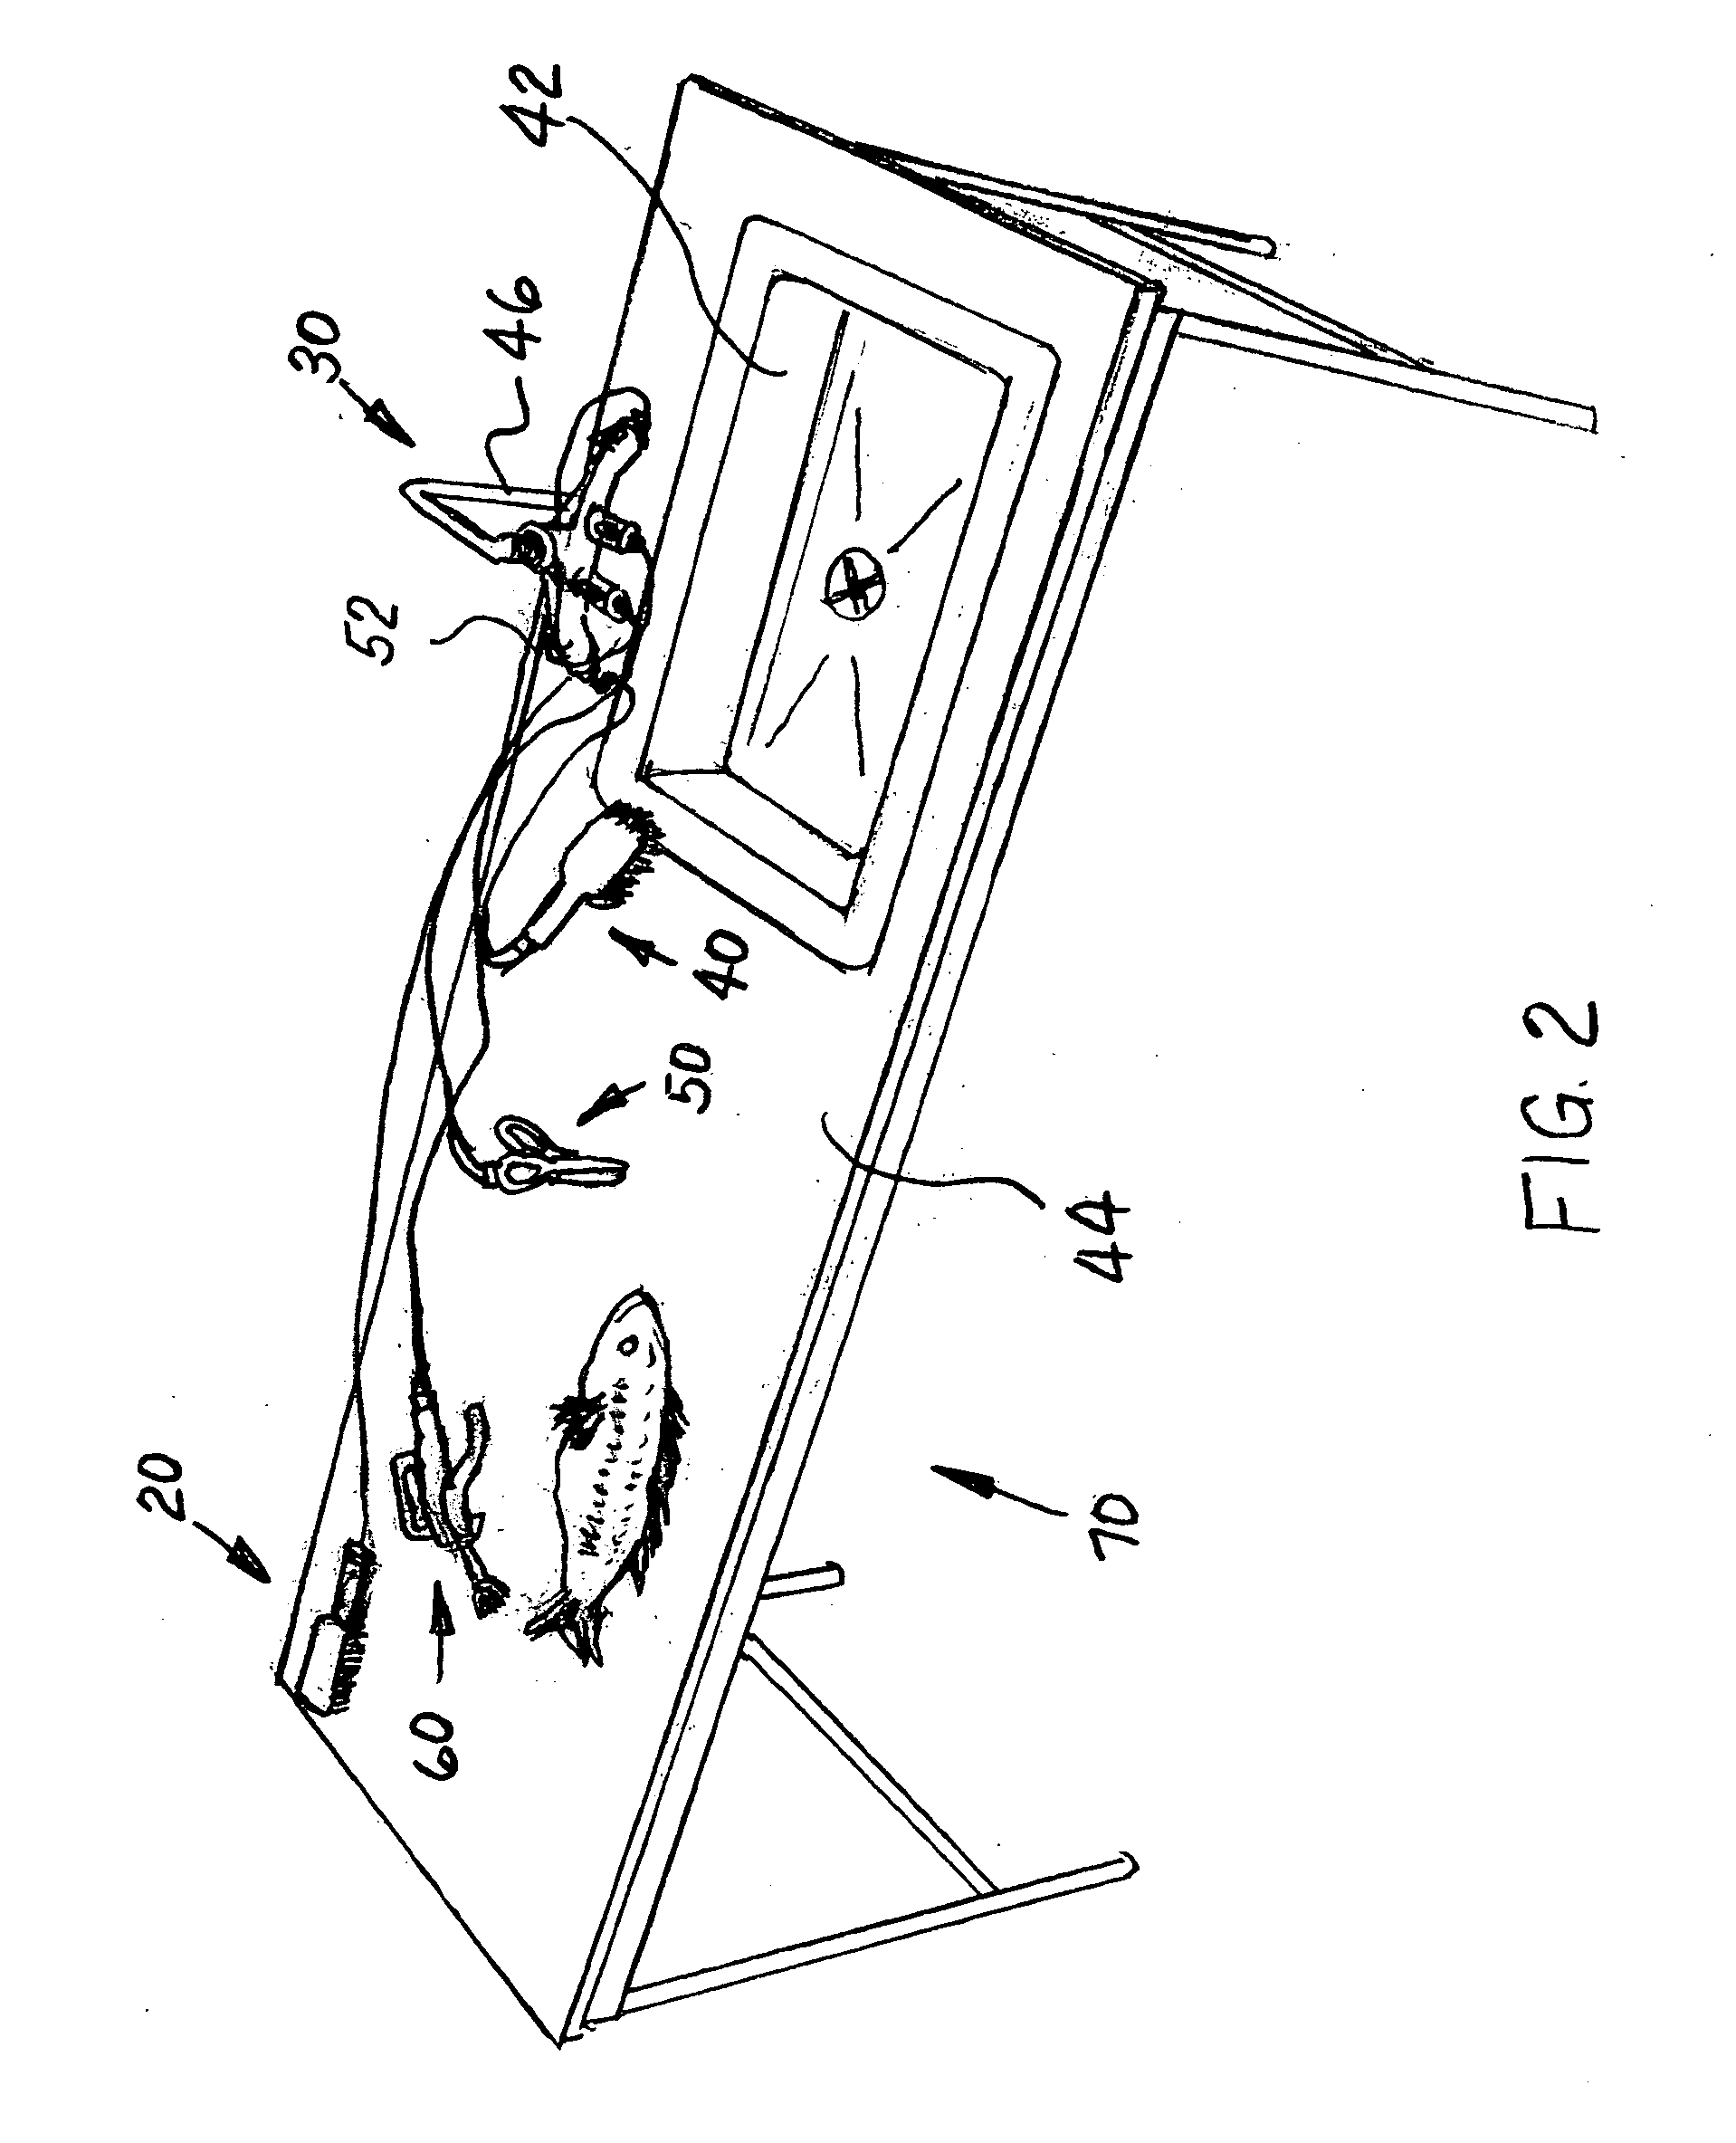 Fish cleaning apparatus